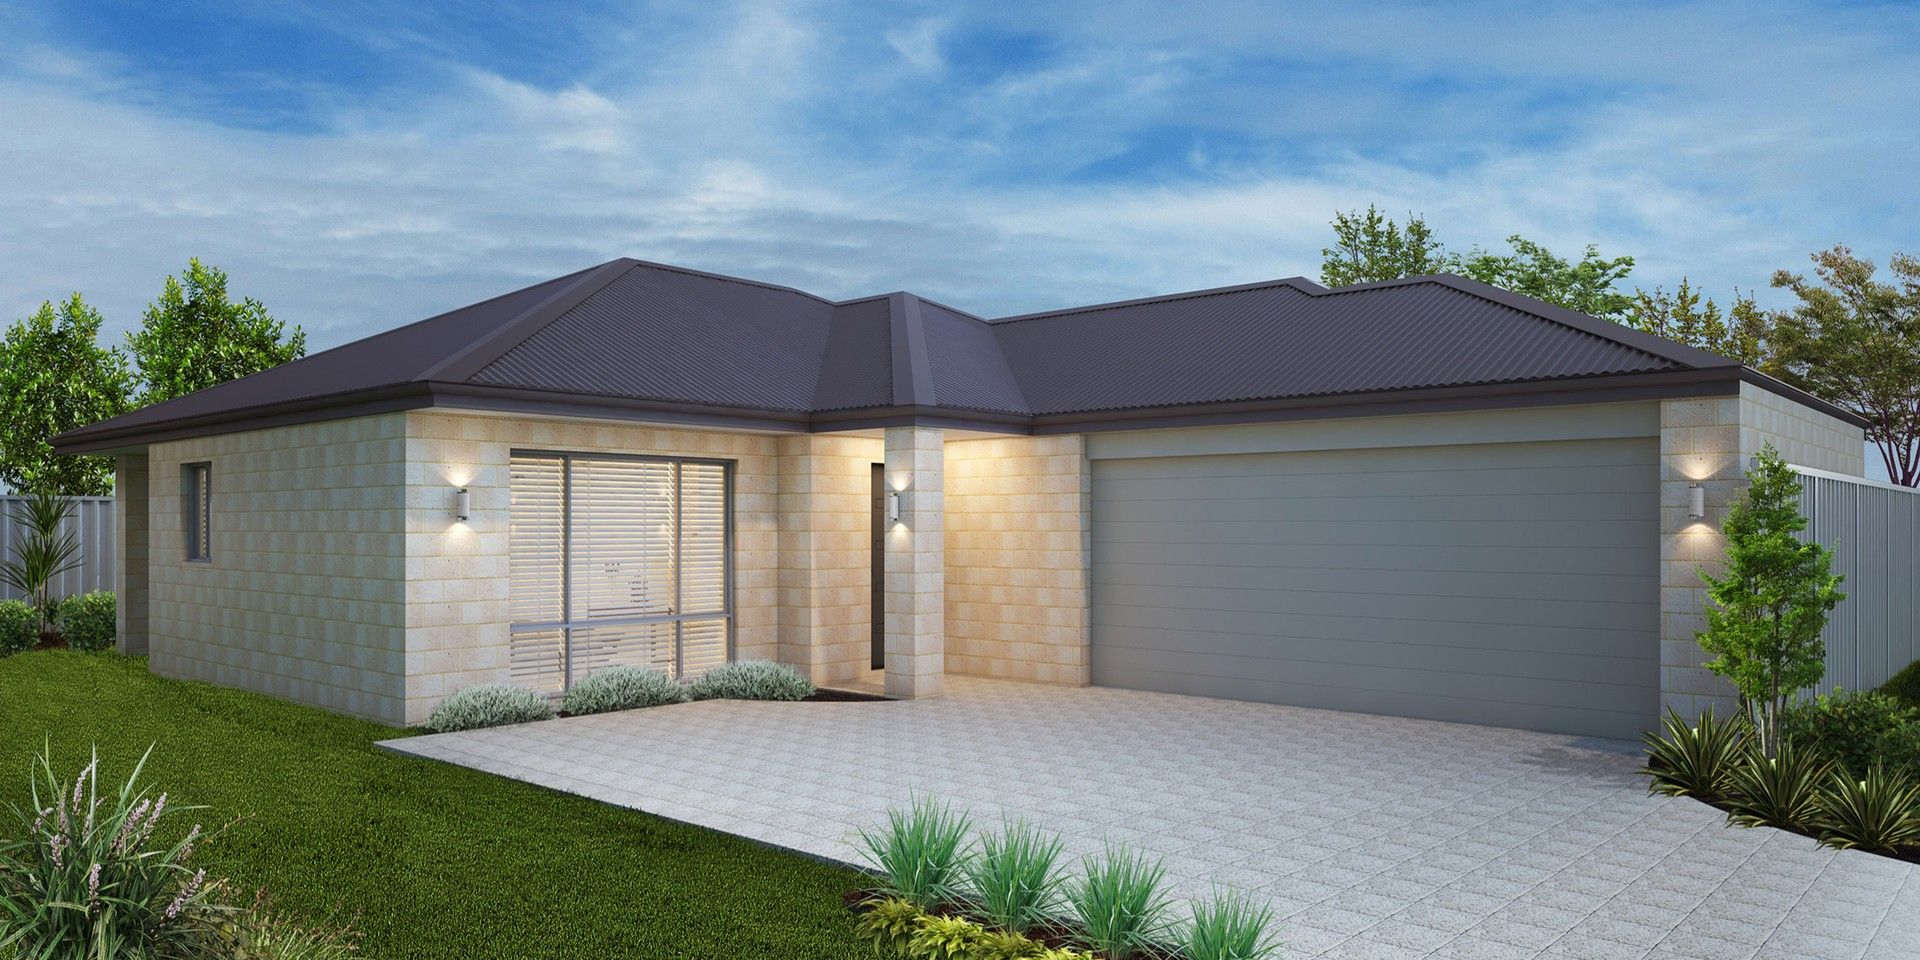 3 bedrooms New House & Land in 8A Bellier Place HAMILTON HILL WA, 6163